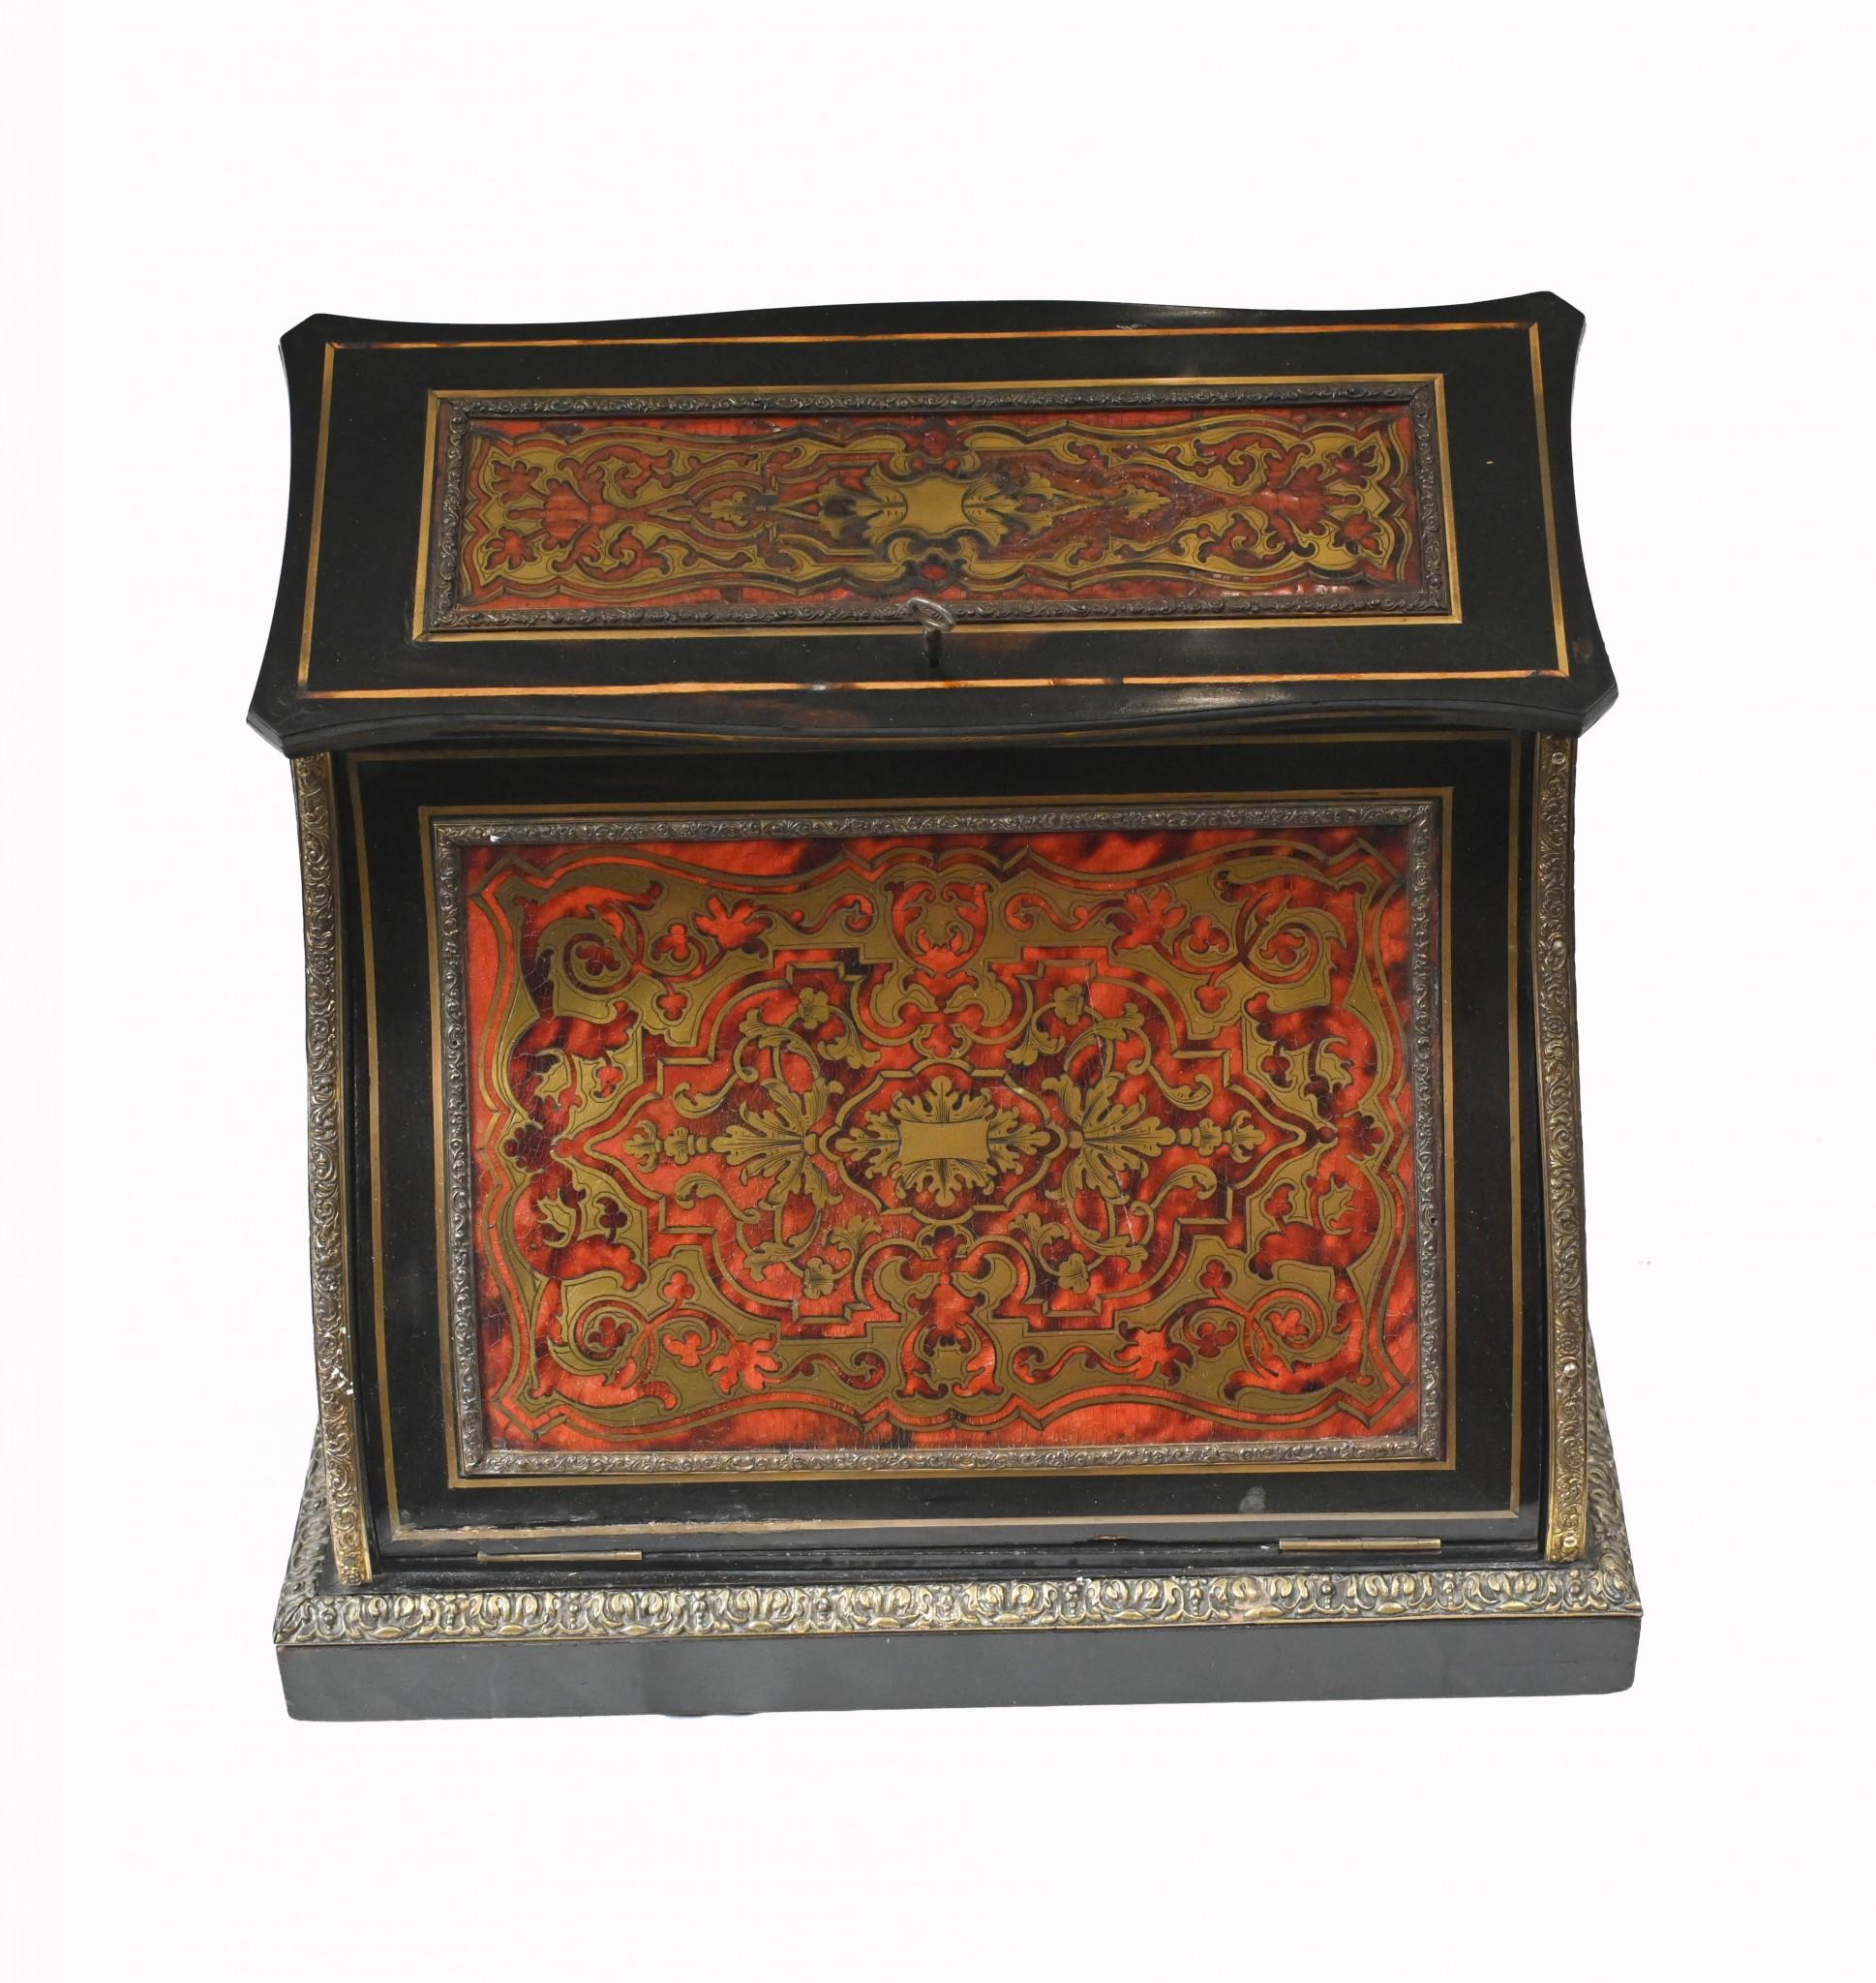 Elegant antique French desk companion with a Boulle style inlay Circa 1880
Compartments inside for letters and desk accessories
Bought from a dealer on Marche Biron at Paris antiques markets Viewings available by appointment
Offered in great shape